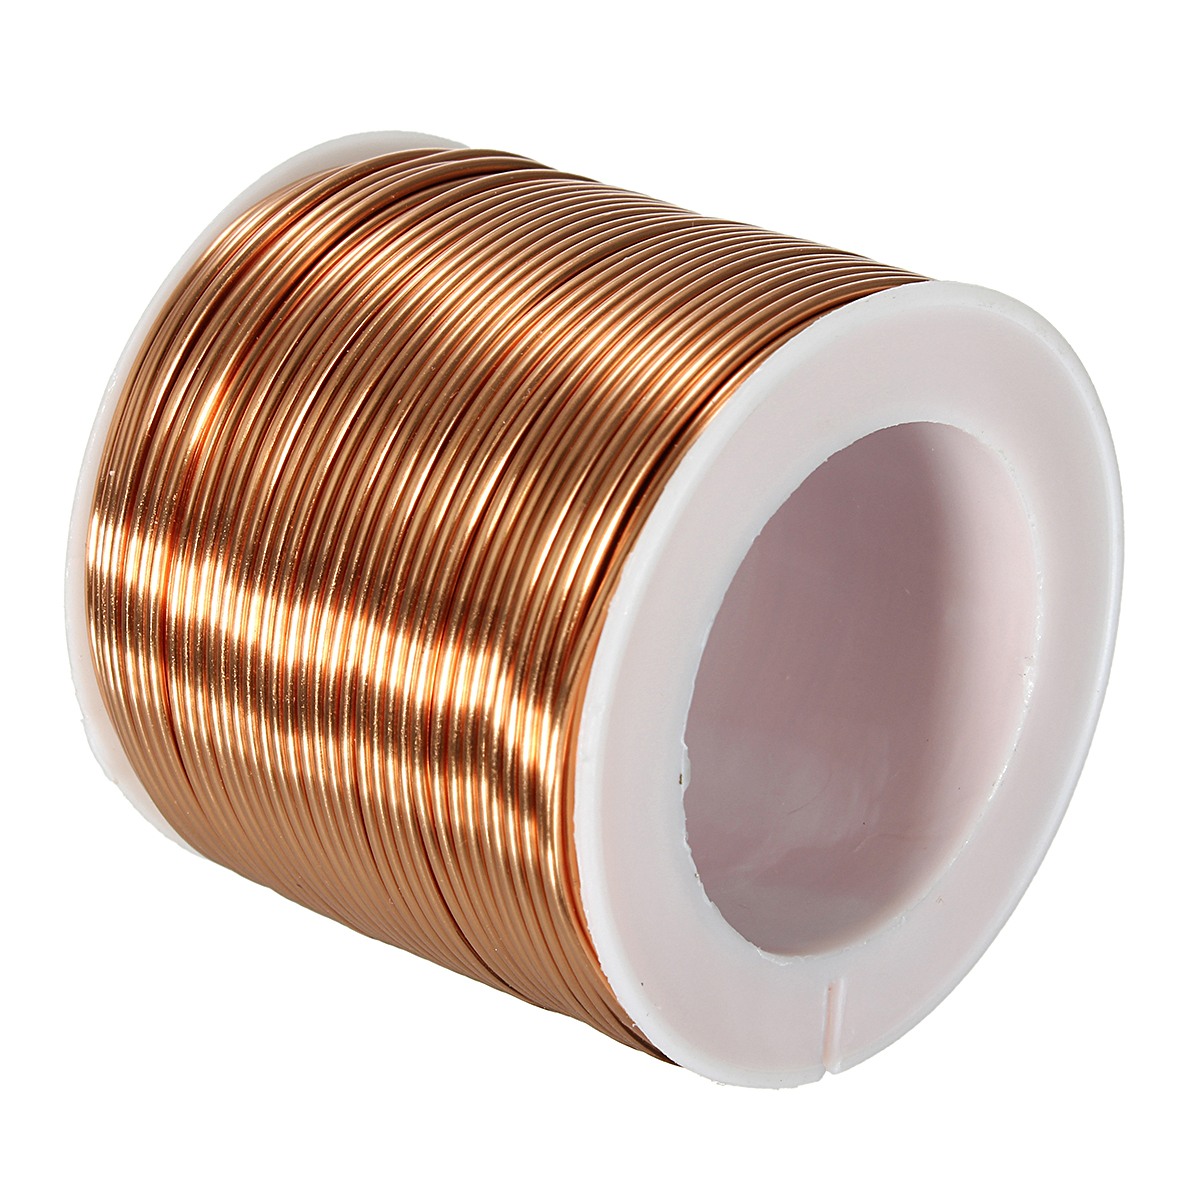 10mmx25m-Copper-Coil-Magnet-Wire-Welding-Cable-Enameled-Wire-Roll-1094161-2